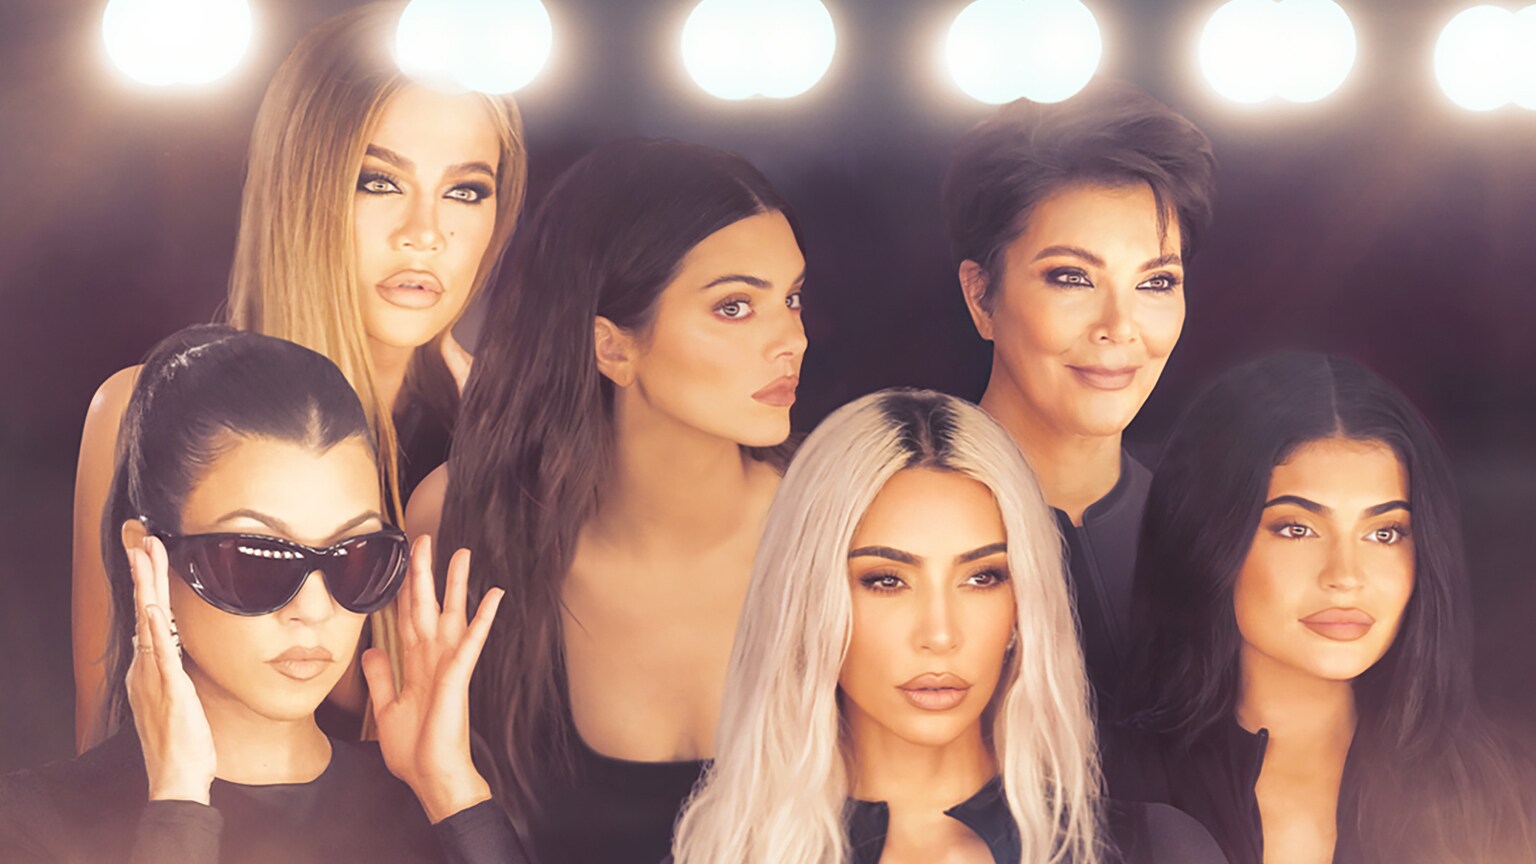 The Kardashians Airstream experience will arrive in Manchester this month